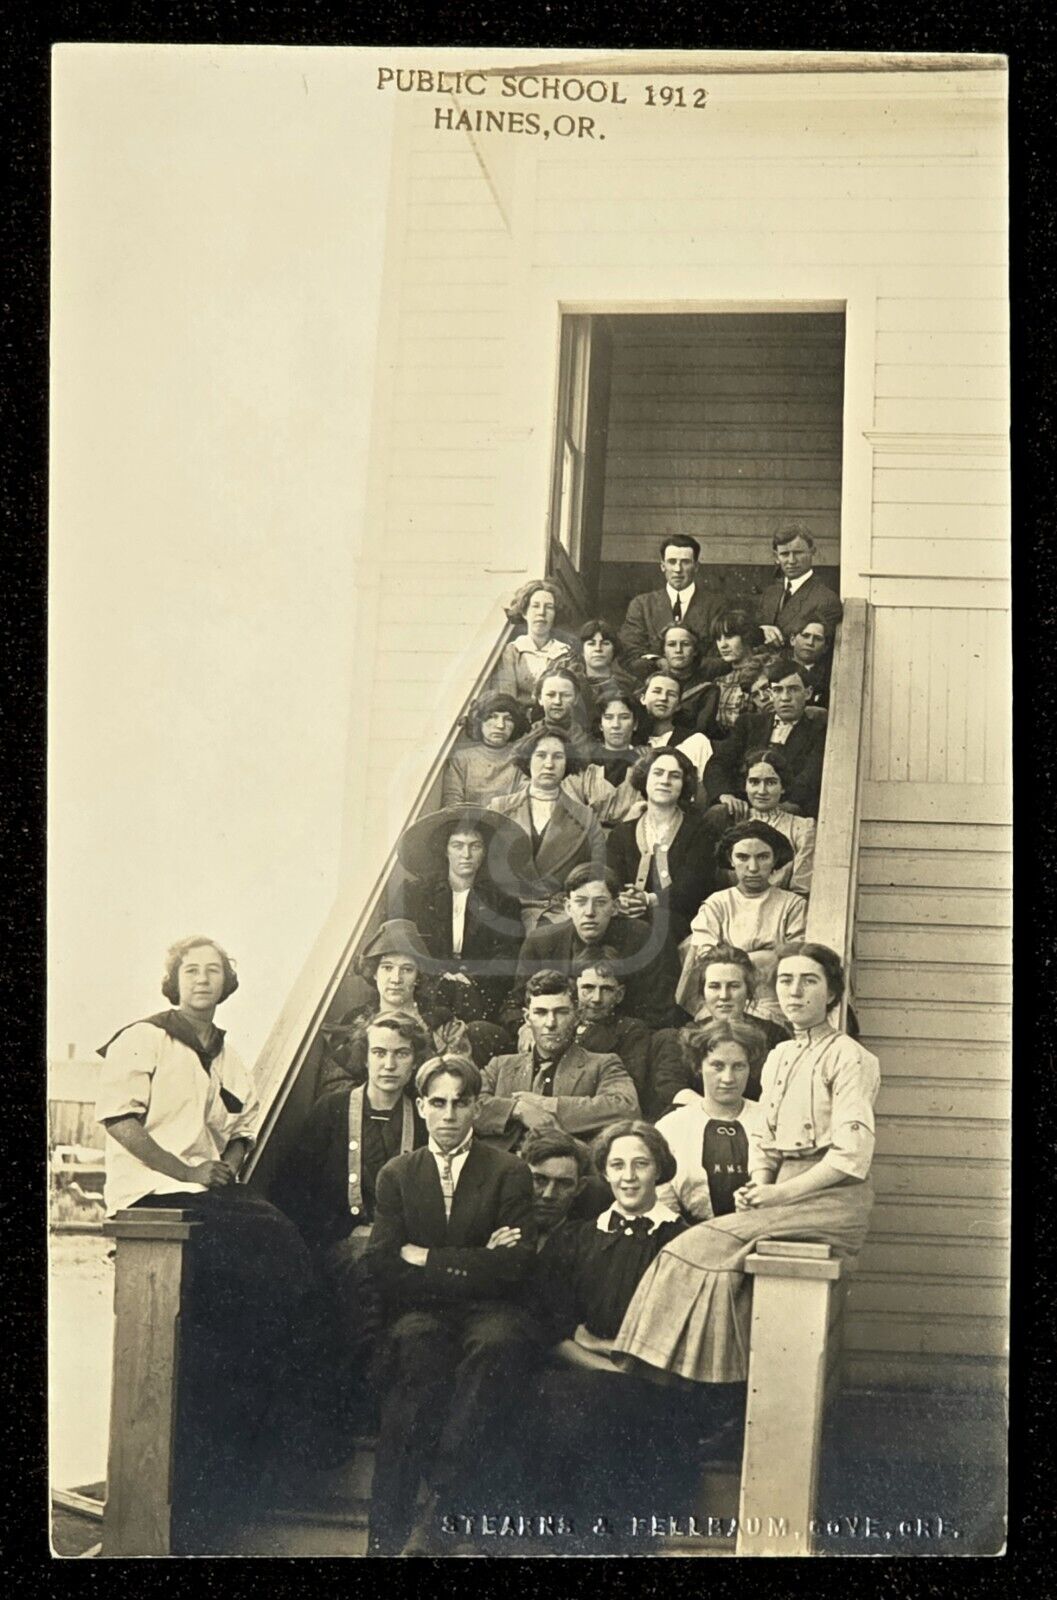 Early RPPC of Students On School Steps in Haines, Oregon. C 1912. Harney County